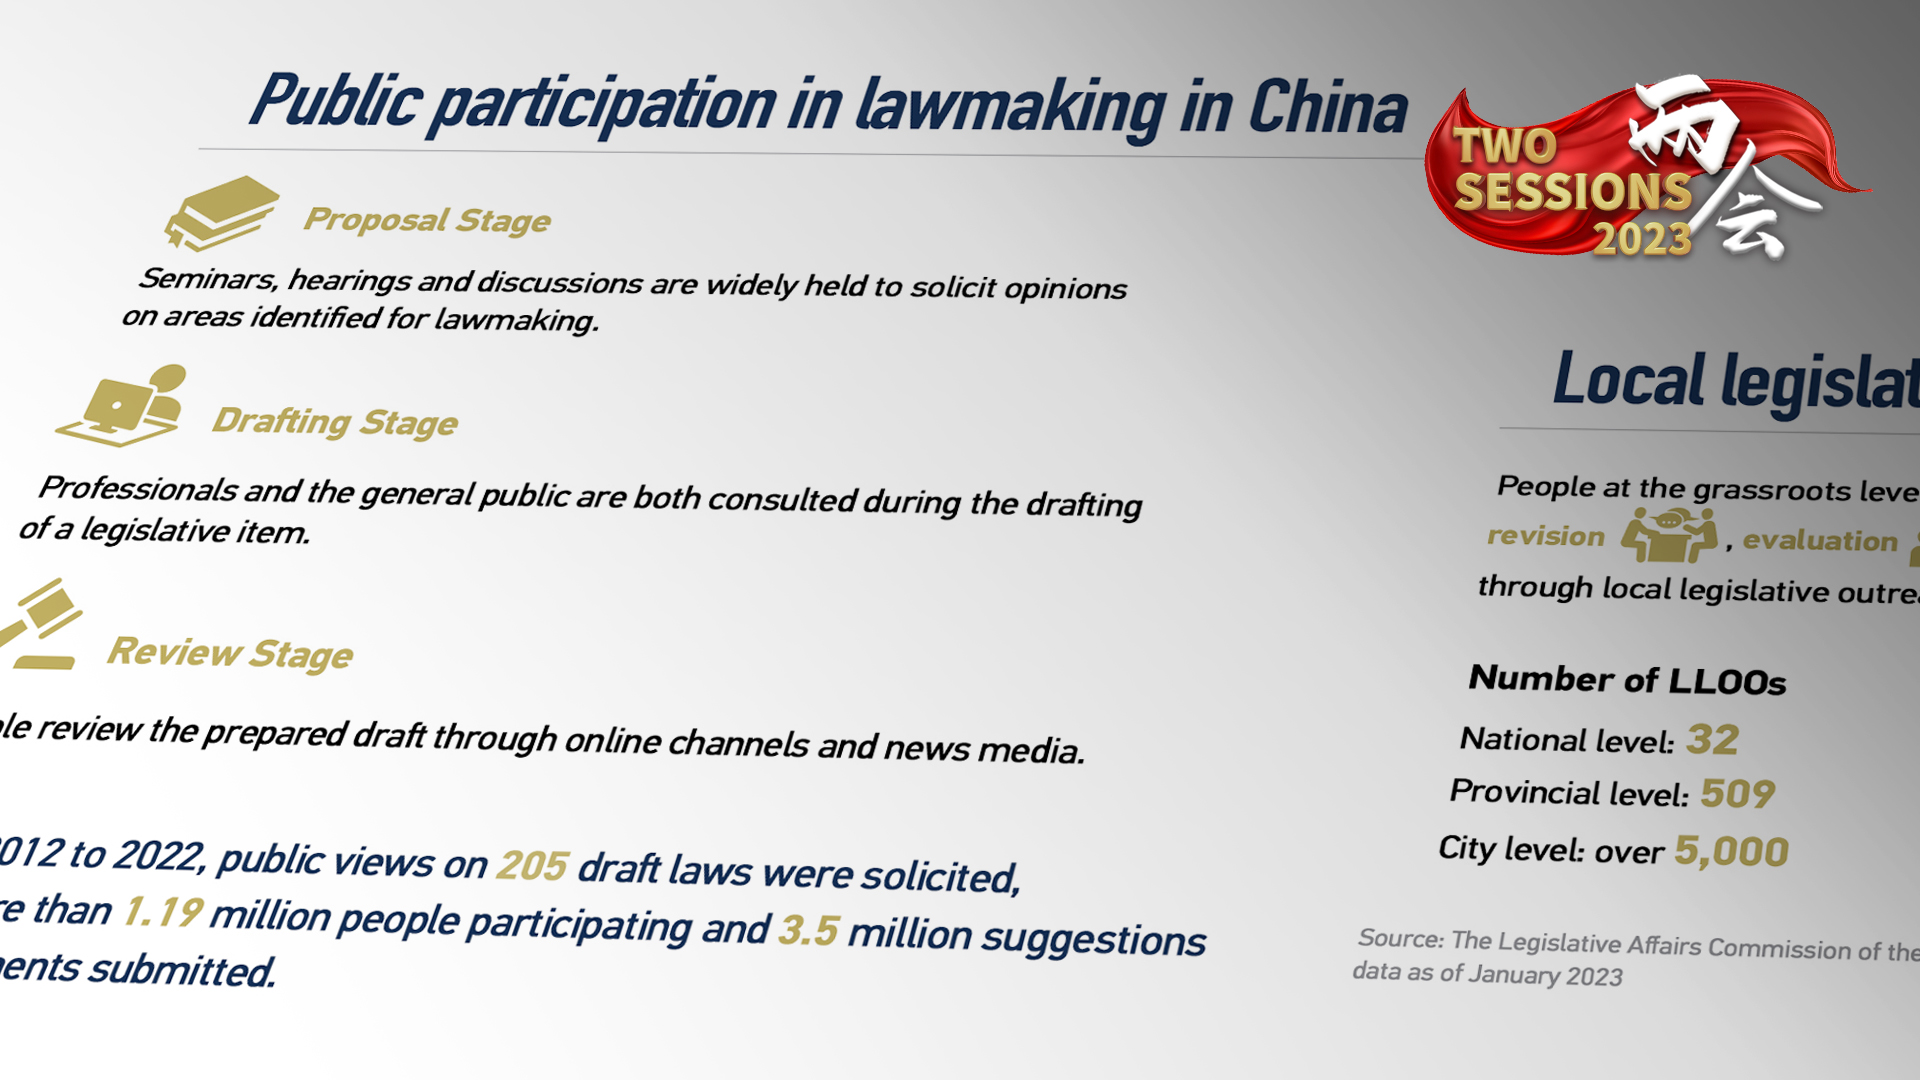 How public voices play key role in China's lawmaking process